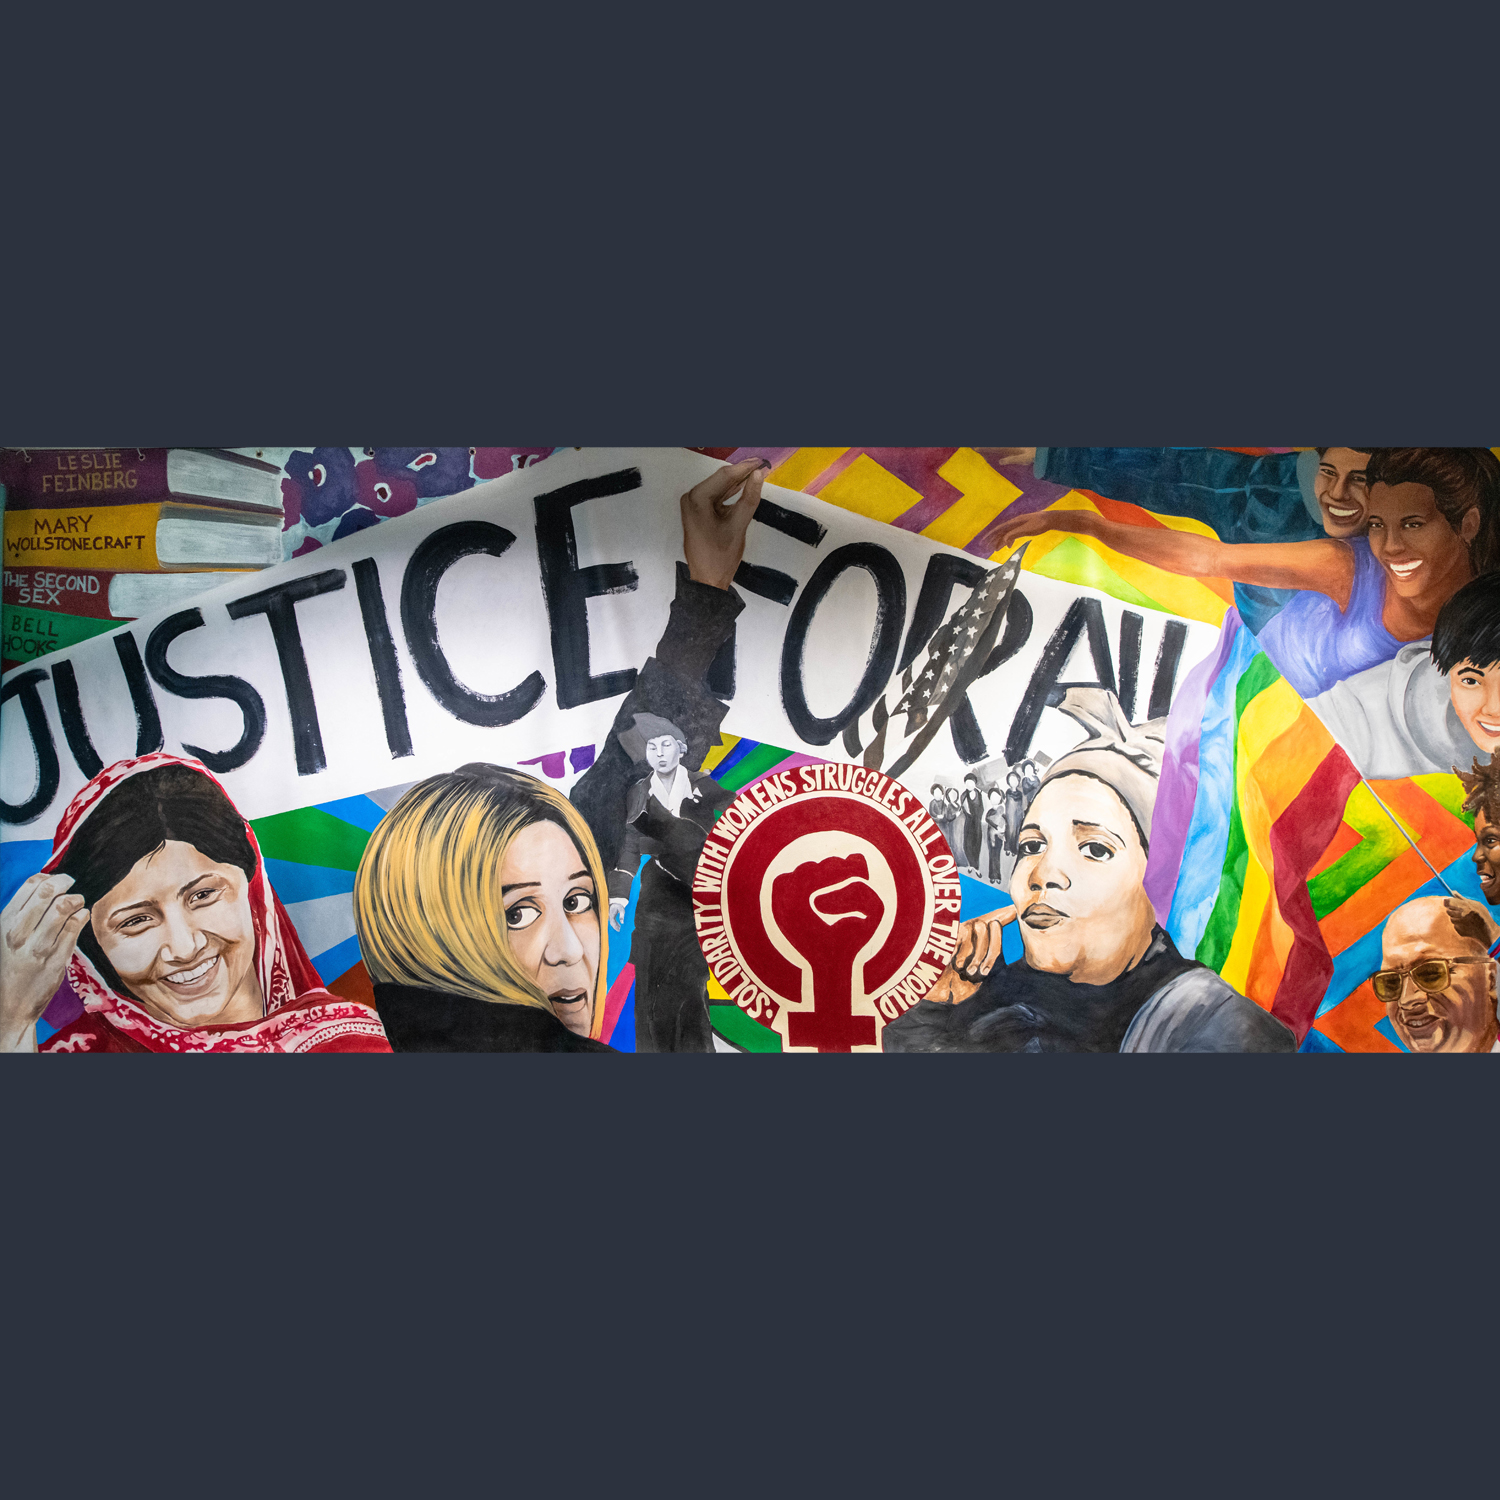 Art showing justice for all and paintings representing diversity, equity, and inclusion.